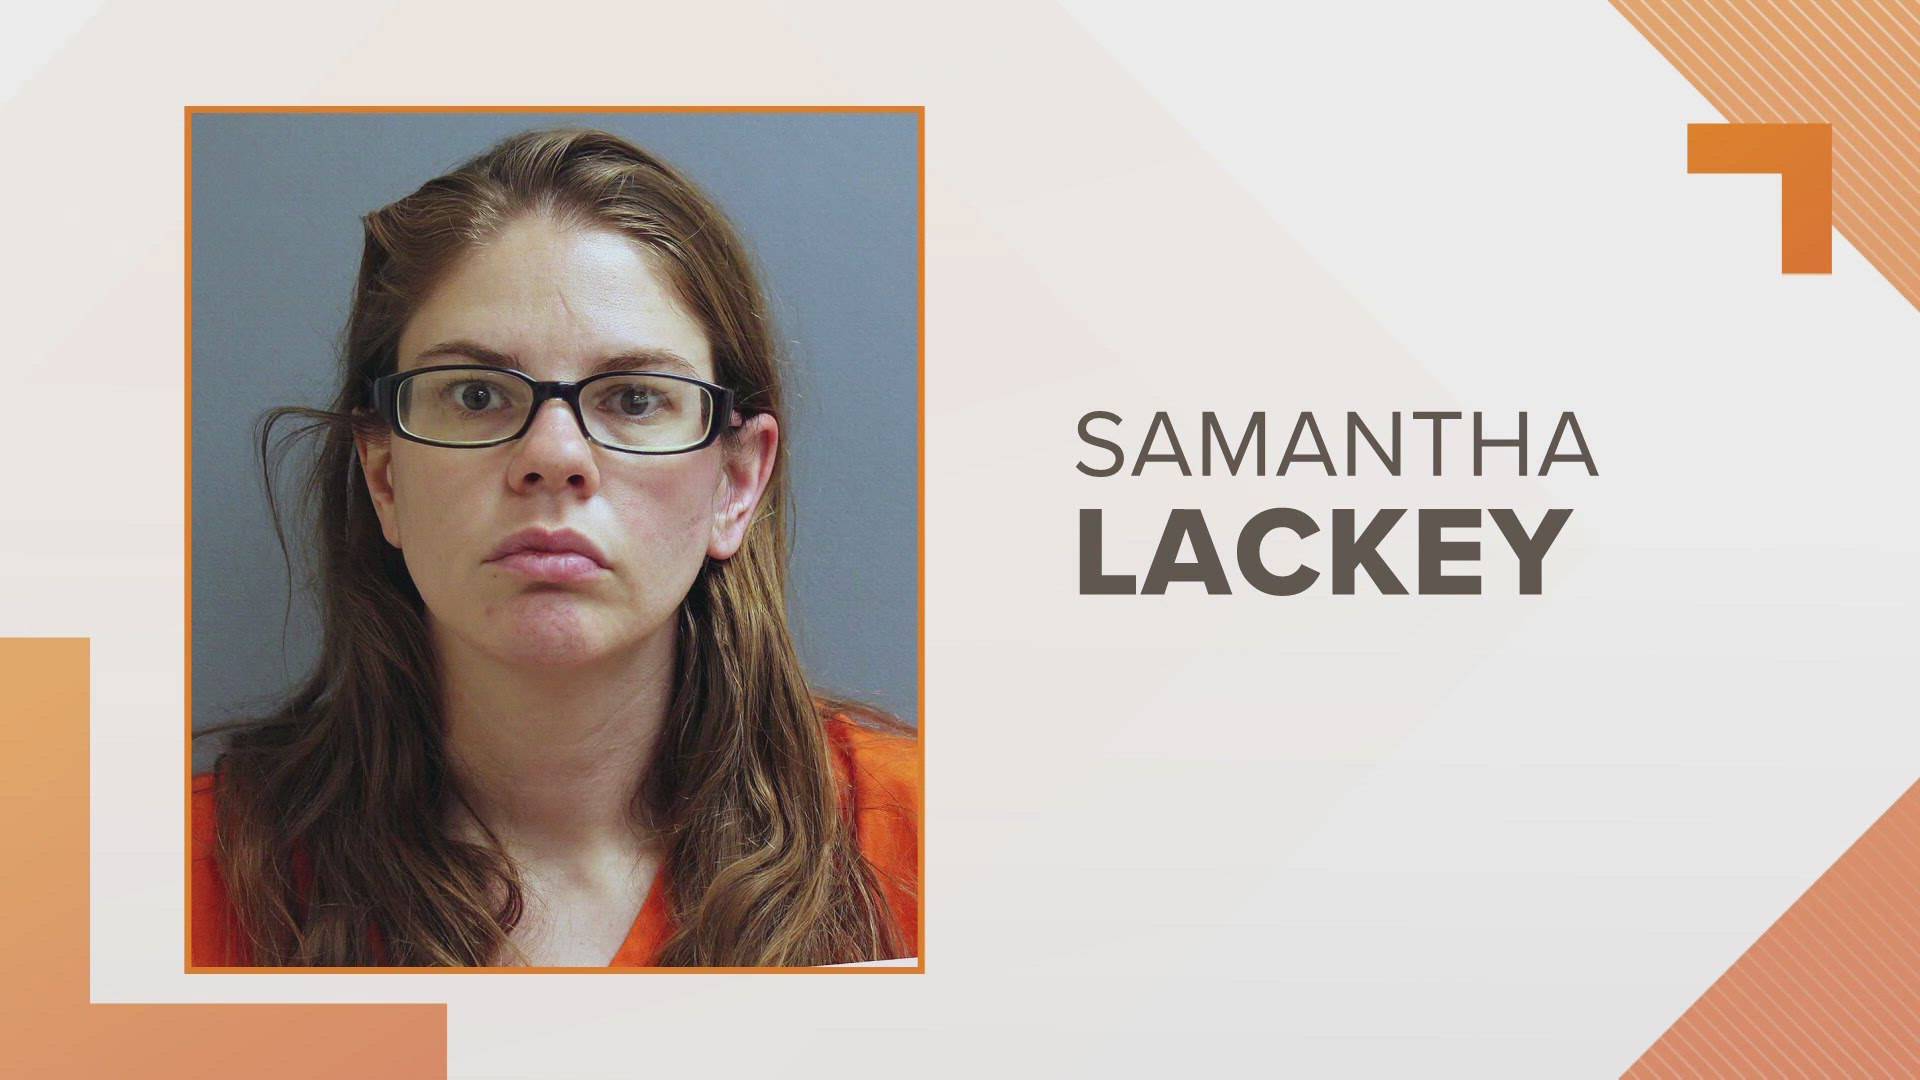 A woman faces charges for admitting to shooting and killing her husband in Franklin County. She was charged with second-degree murder and armed criminal action.